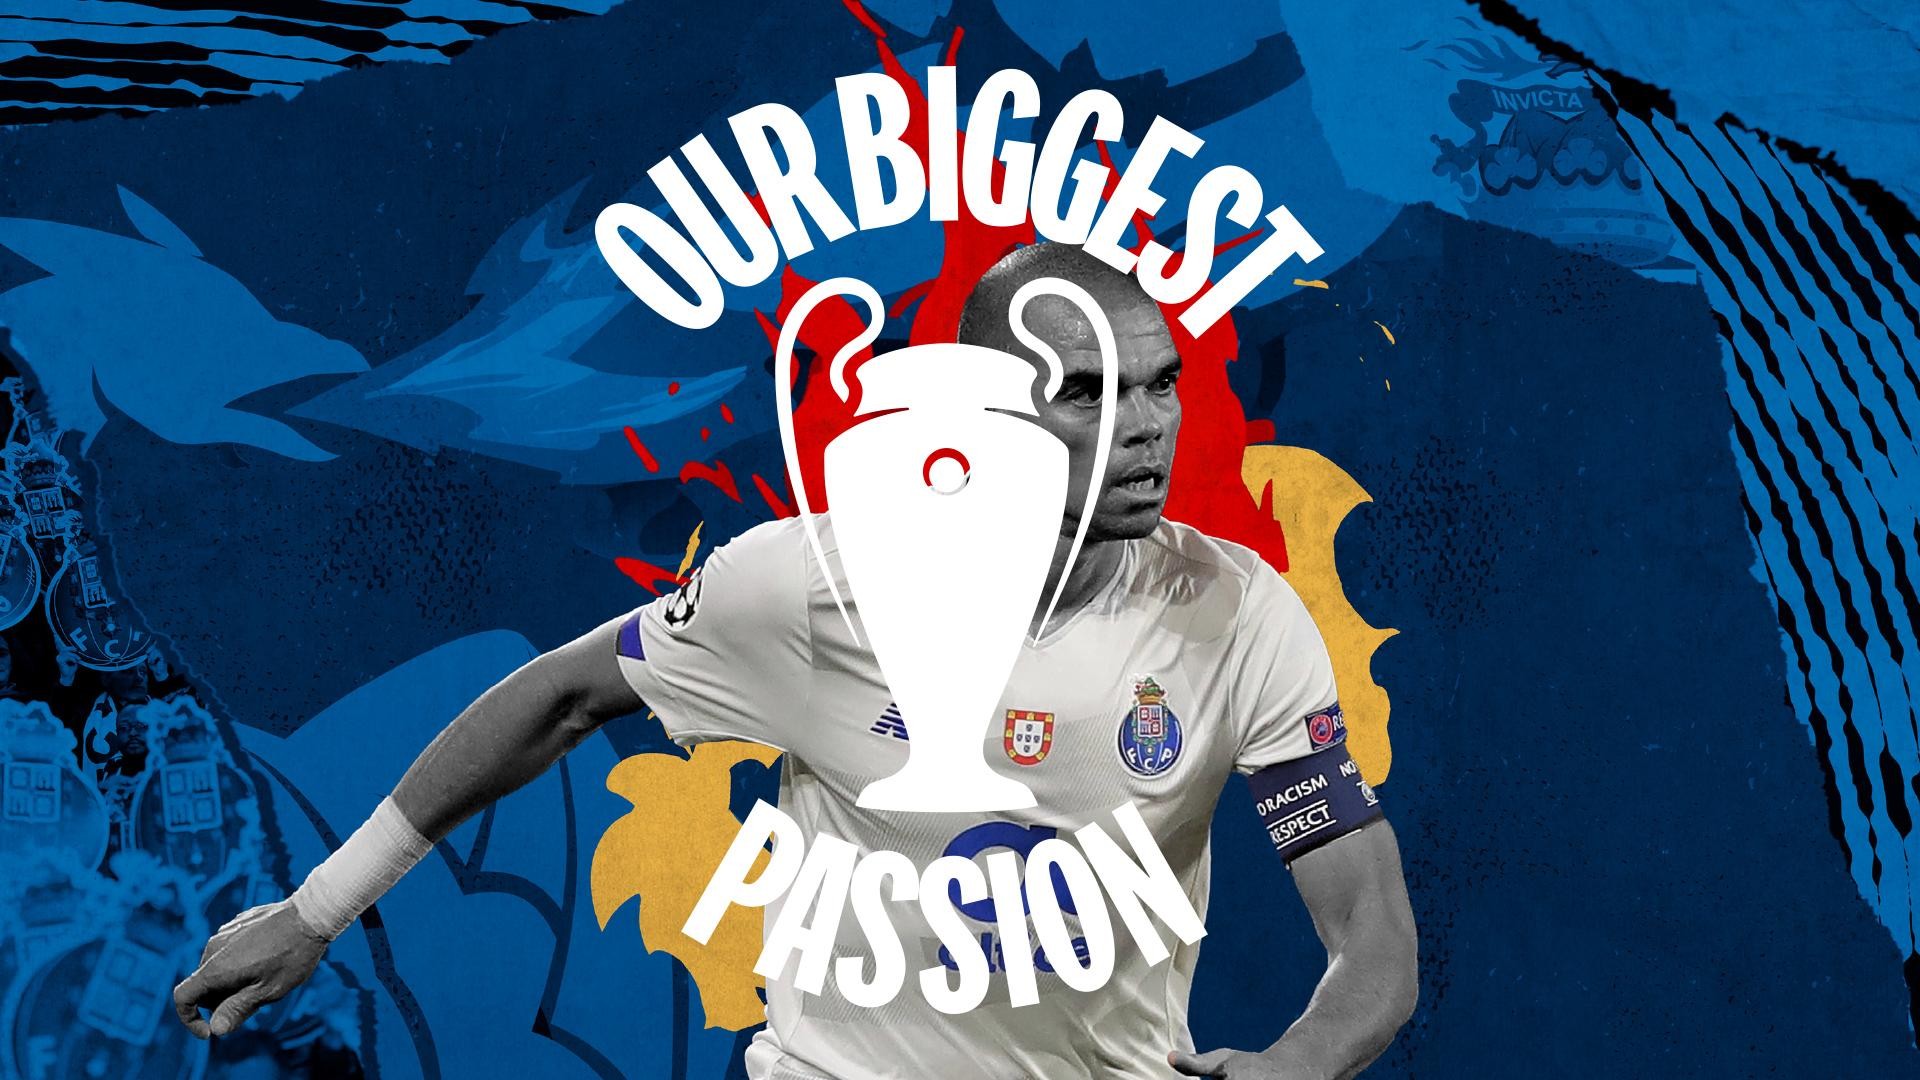 Our Biggest Passion